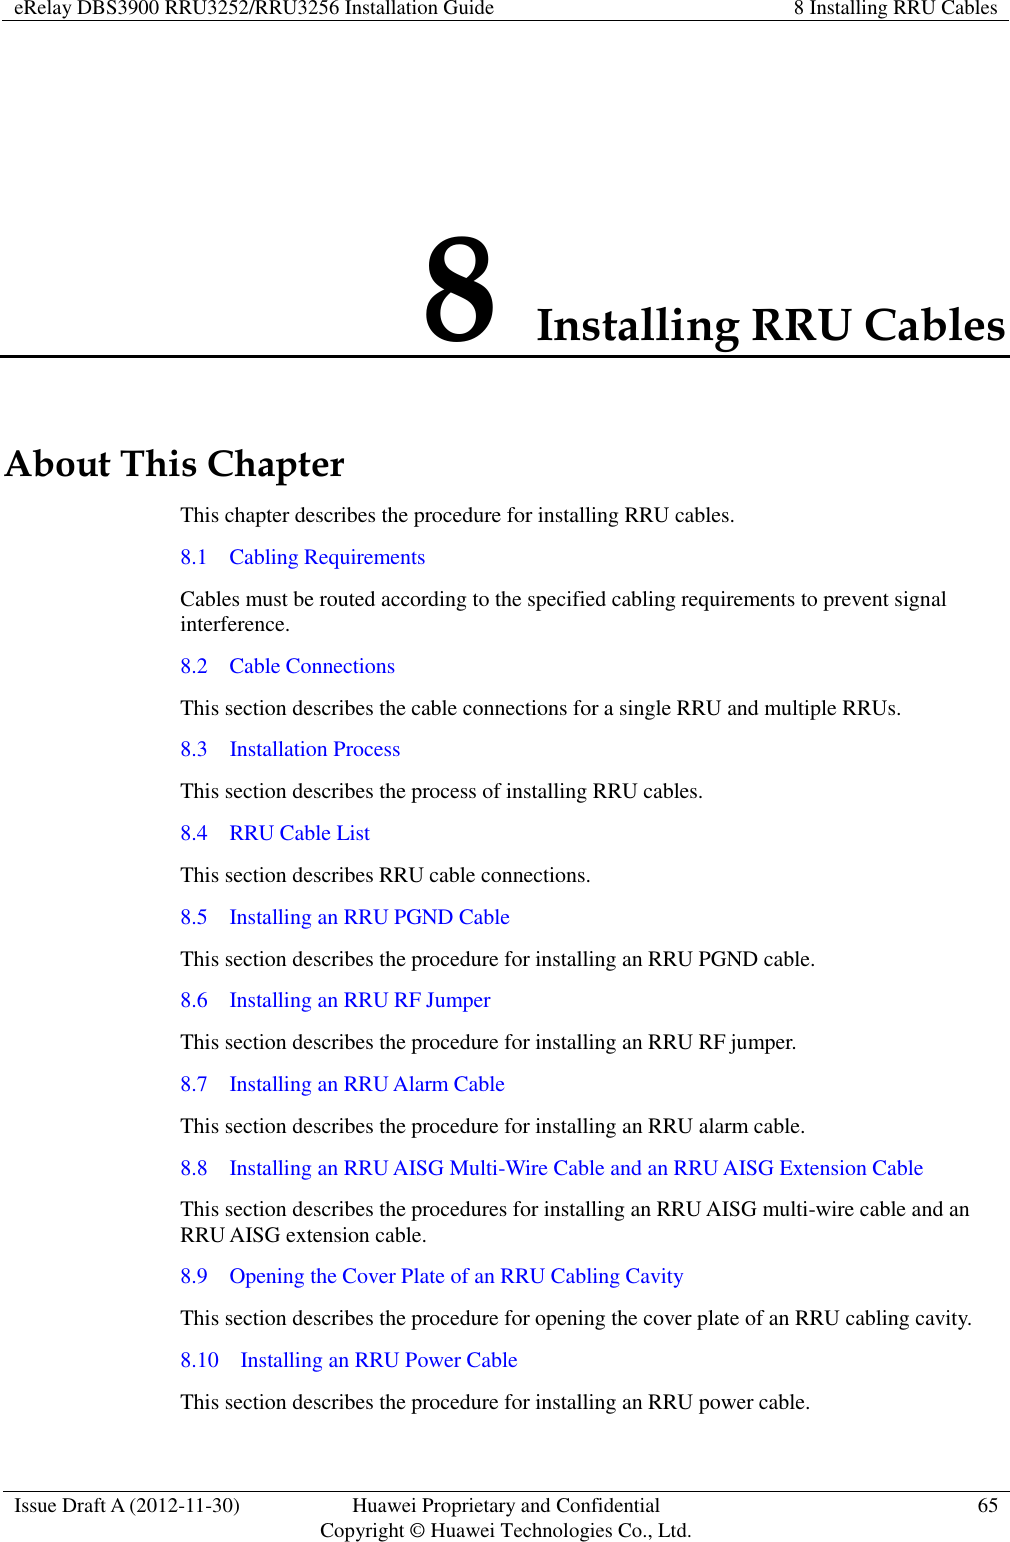 eRelay DBS3900 RRU3252/RRU3256 Installation Guide 8 Installing RRU Cables  Issue Draft A (2012-11-30) Huawei Proprietary and Confidential                                     Copyright © Huawei Technologies Co., Ltd. 65  8 Installing RRU Cables About This Chapter This chapter describes the procedure for installing RRU cables.   8.1    Cabling Requirements Cables must be routed according to the specified cabling requirements to prevent signal interference. 8.2    Cable Connections This section describes the cable connections for a single RRU and multiple RRUs. 8.3  Installation Process This section describes the process of installing RRU cables. 8.4    RRU Cable List This section describes RRU cable connections. 8.5    Installing an RRU PGND Cable This section describes the procedure for installing an RRU PGND cable. 8.6    Installing an RRU RF Jumper This section describes the procedure for installing an RRU RF jumper. 8.7    Installing an RRU Alarm Cable This section describes the procedure for installing an RRU alarm cable. 8.8    Installing an RRU AISG Multi-Wire Cable and an RRU AISG Extension Cable This section describes the procedures for installing an RRU AISG multi-wire cable and an RRU AISG extension cable. 8.9    Opening the Cover Plate of an RRU Cabling Cavity This section describes the procedure for opening the cover plate of an RRU cabling cavity. 8.10    Installing an RRU Power Cable This section describes the procedure for installing an RRU power cable. 